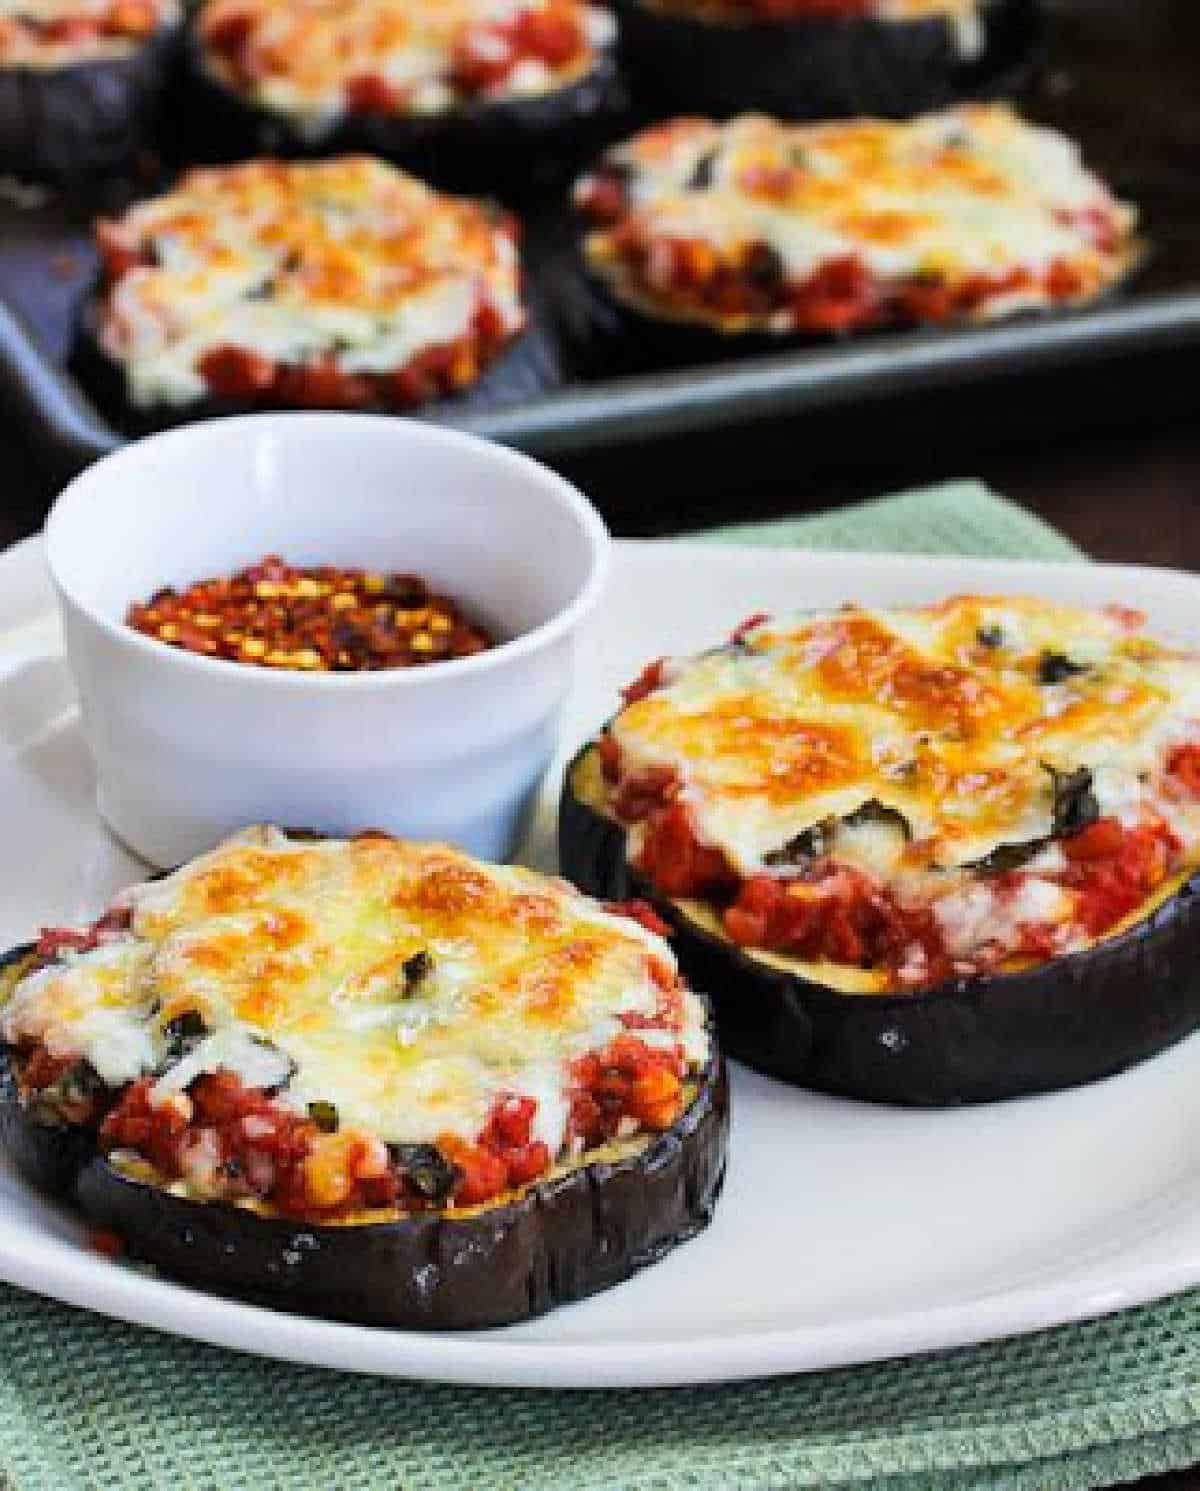 Julia's Eggplant Pizza for kids Crop the image with eggplant pizza on a serving plate with red pepper flakes